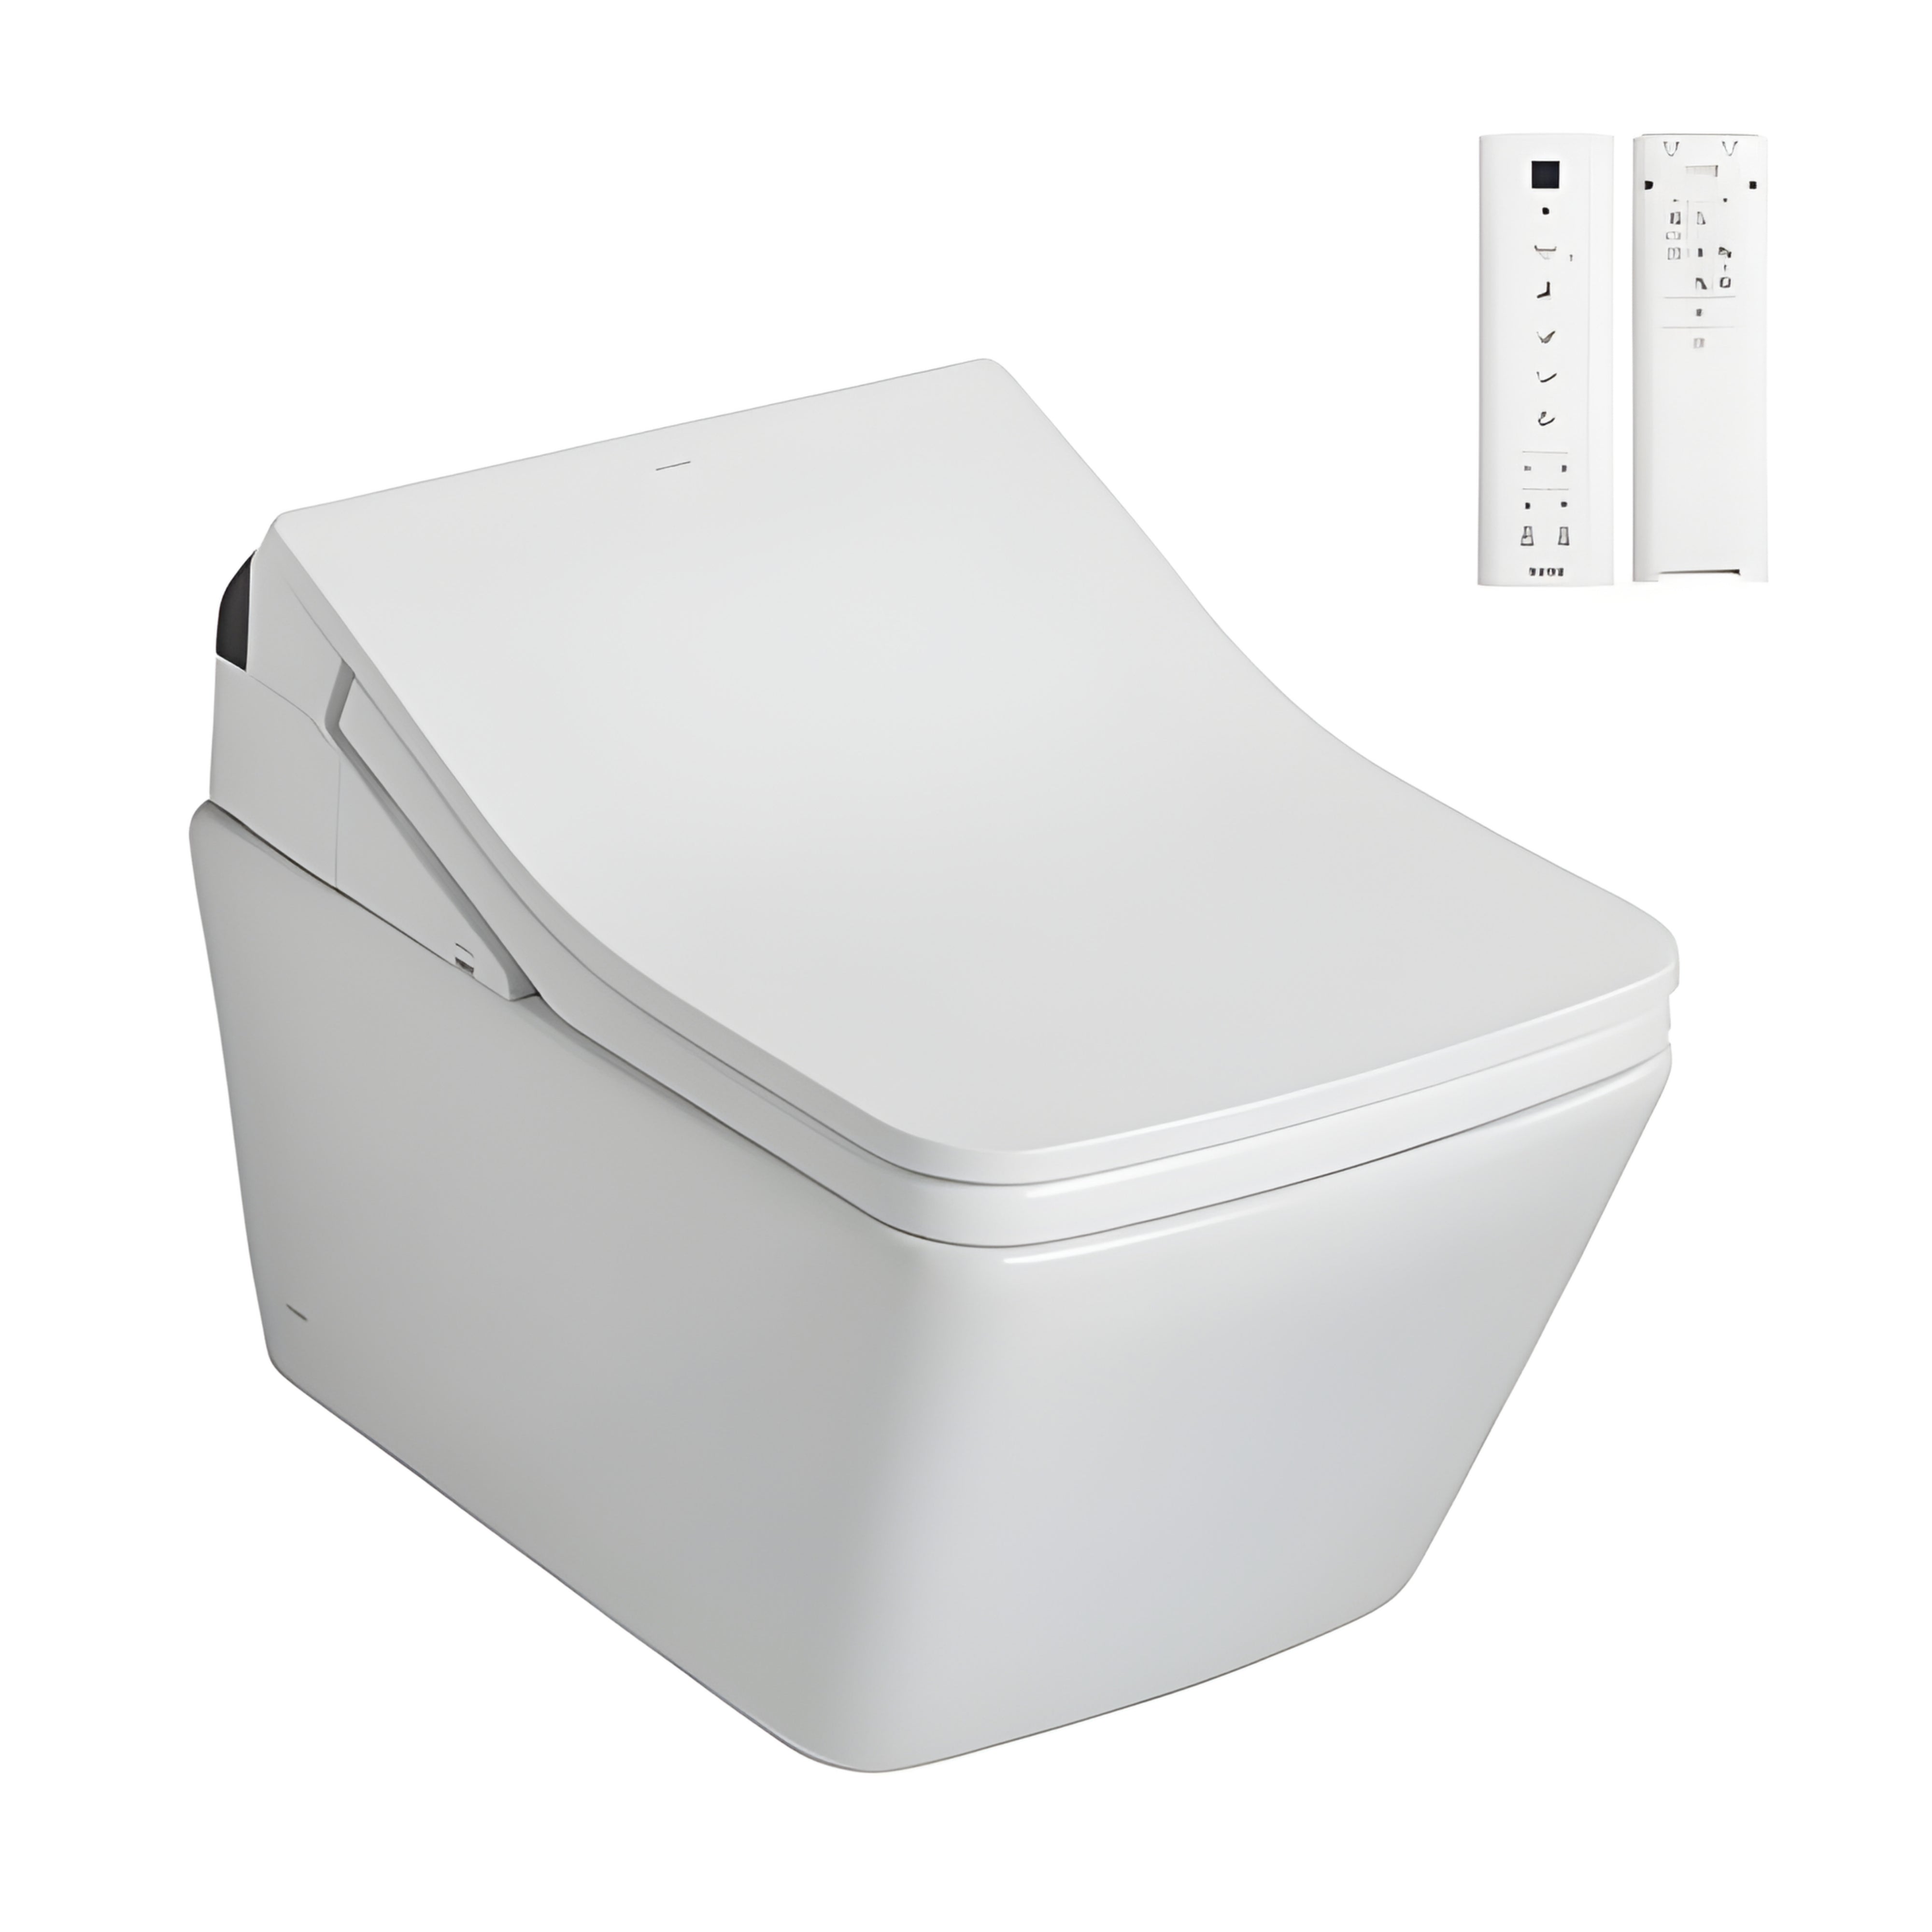 TOTO SX WALL HUNG TOILET WITH WASHLET W/ REMOTE CONTROL PACKAGE GLOSS WHITE